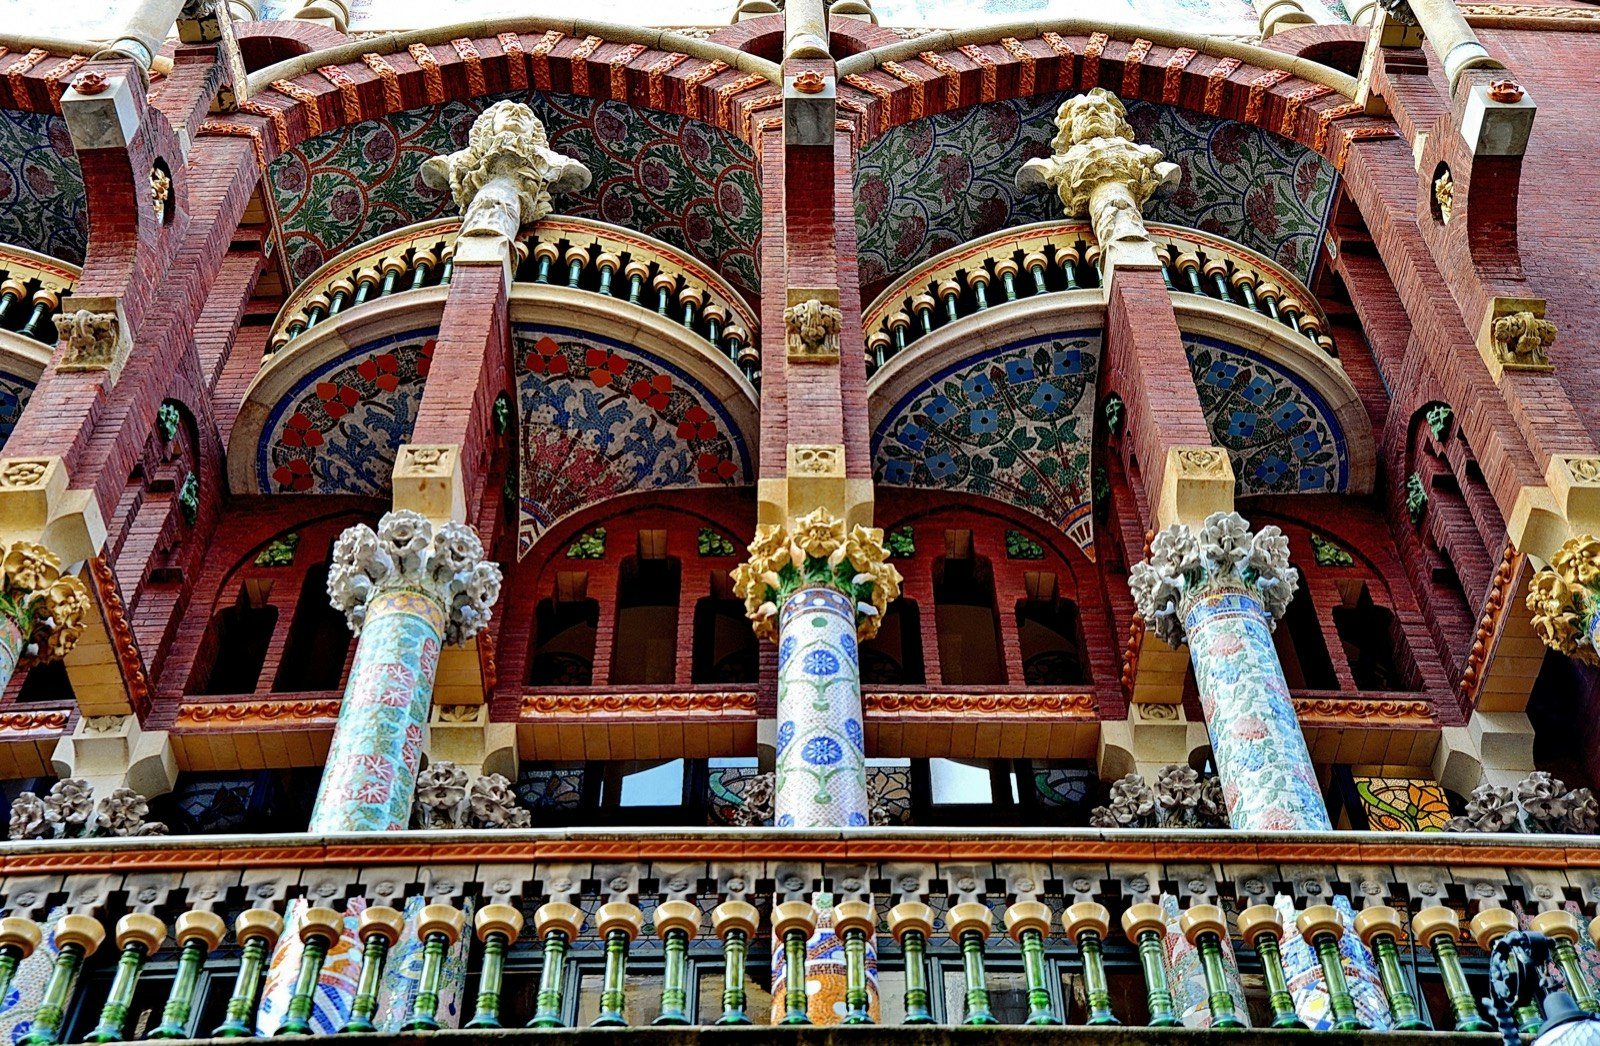 A balcony of the Palau de la Música Catalana, decorated with many multicolored mosaics on the bannisters and columns